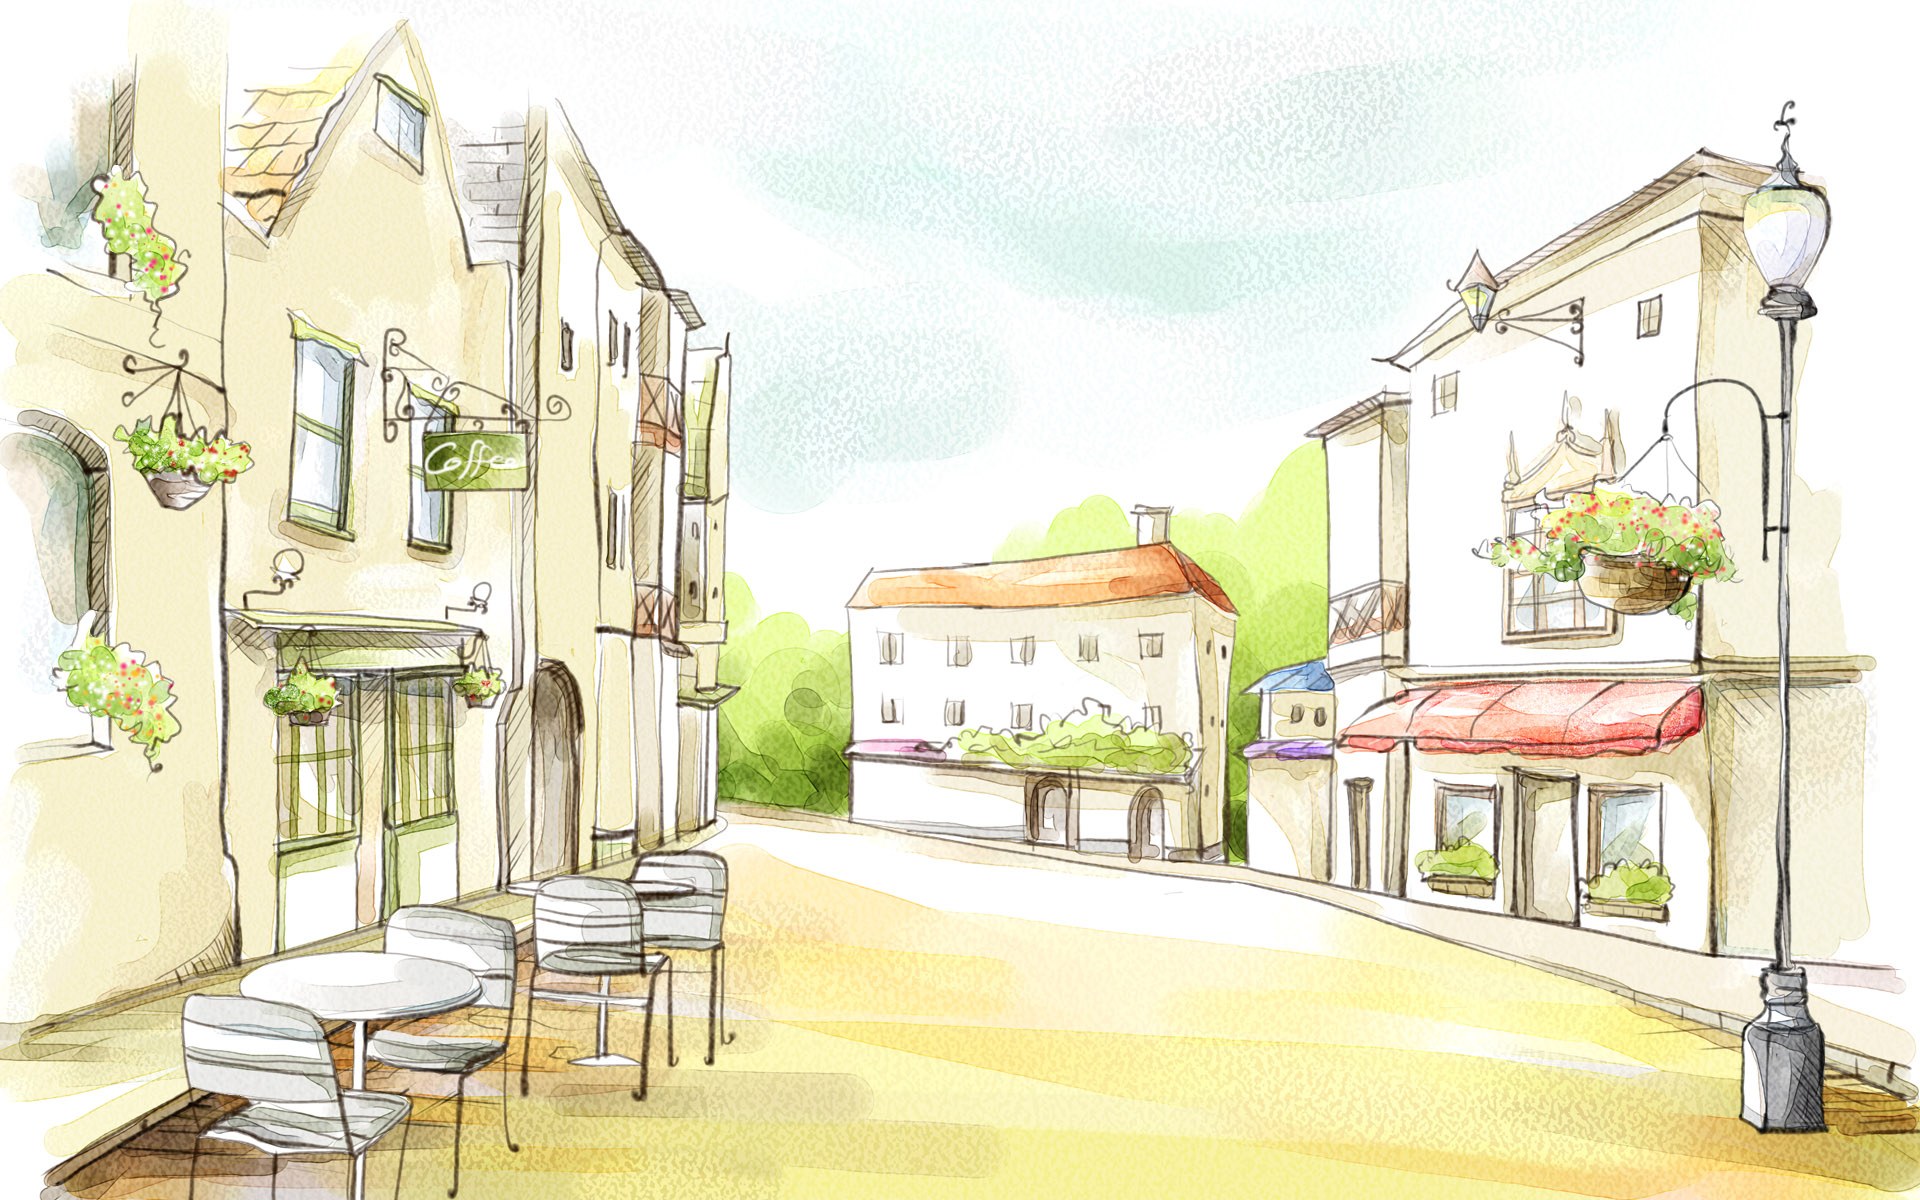 drawing wallpaper hd,watercolor paint,sketch,residential area,building,town